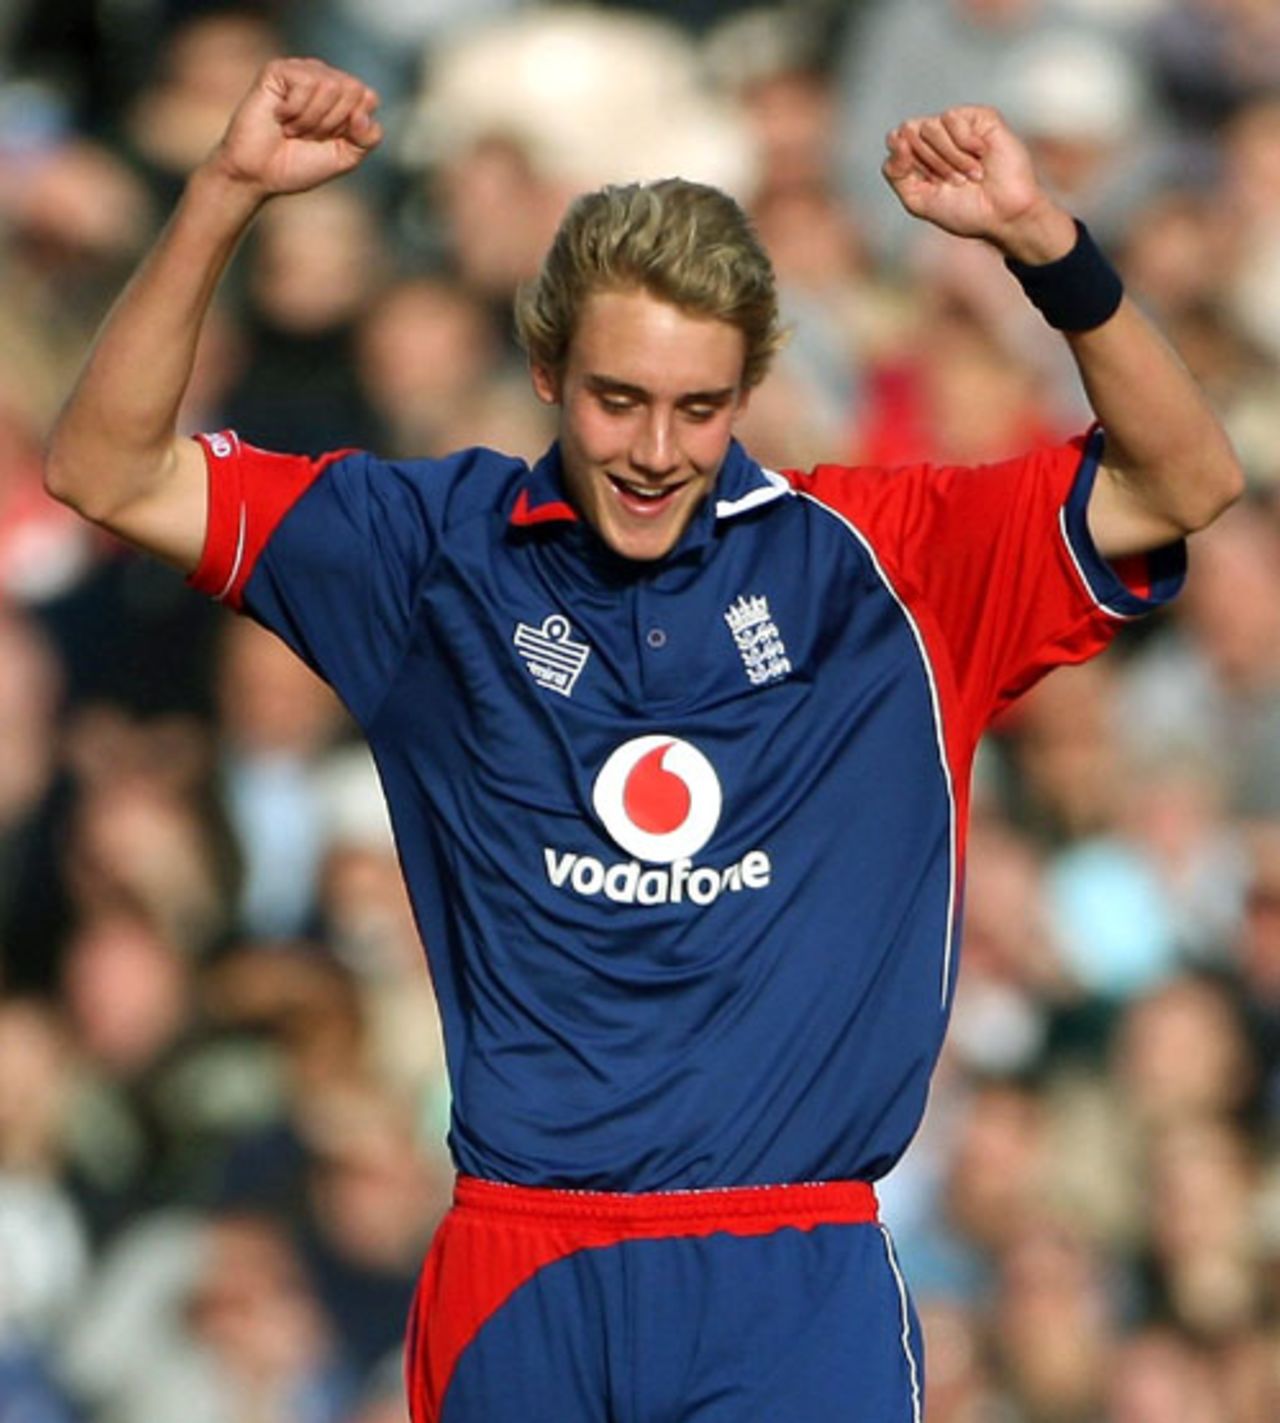 Stuart Broad is delighted after claiming a wicket,  England v India, 4th ODI, Old Trafford, August 30, 2007
